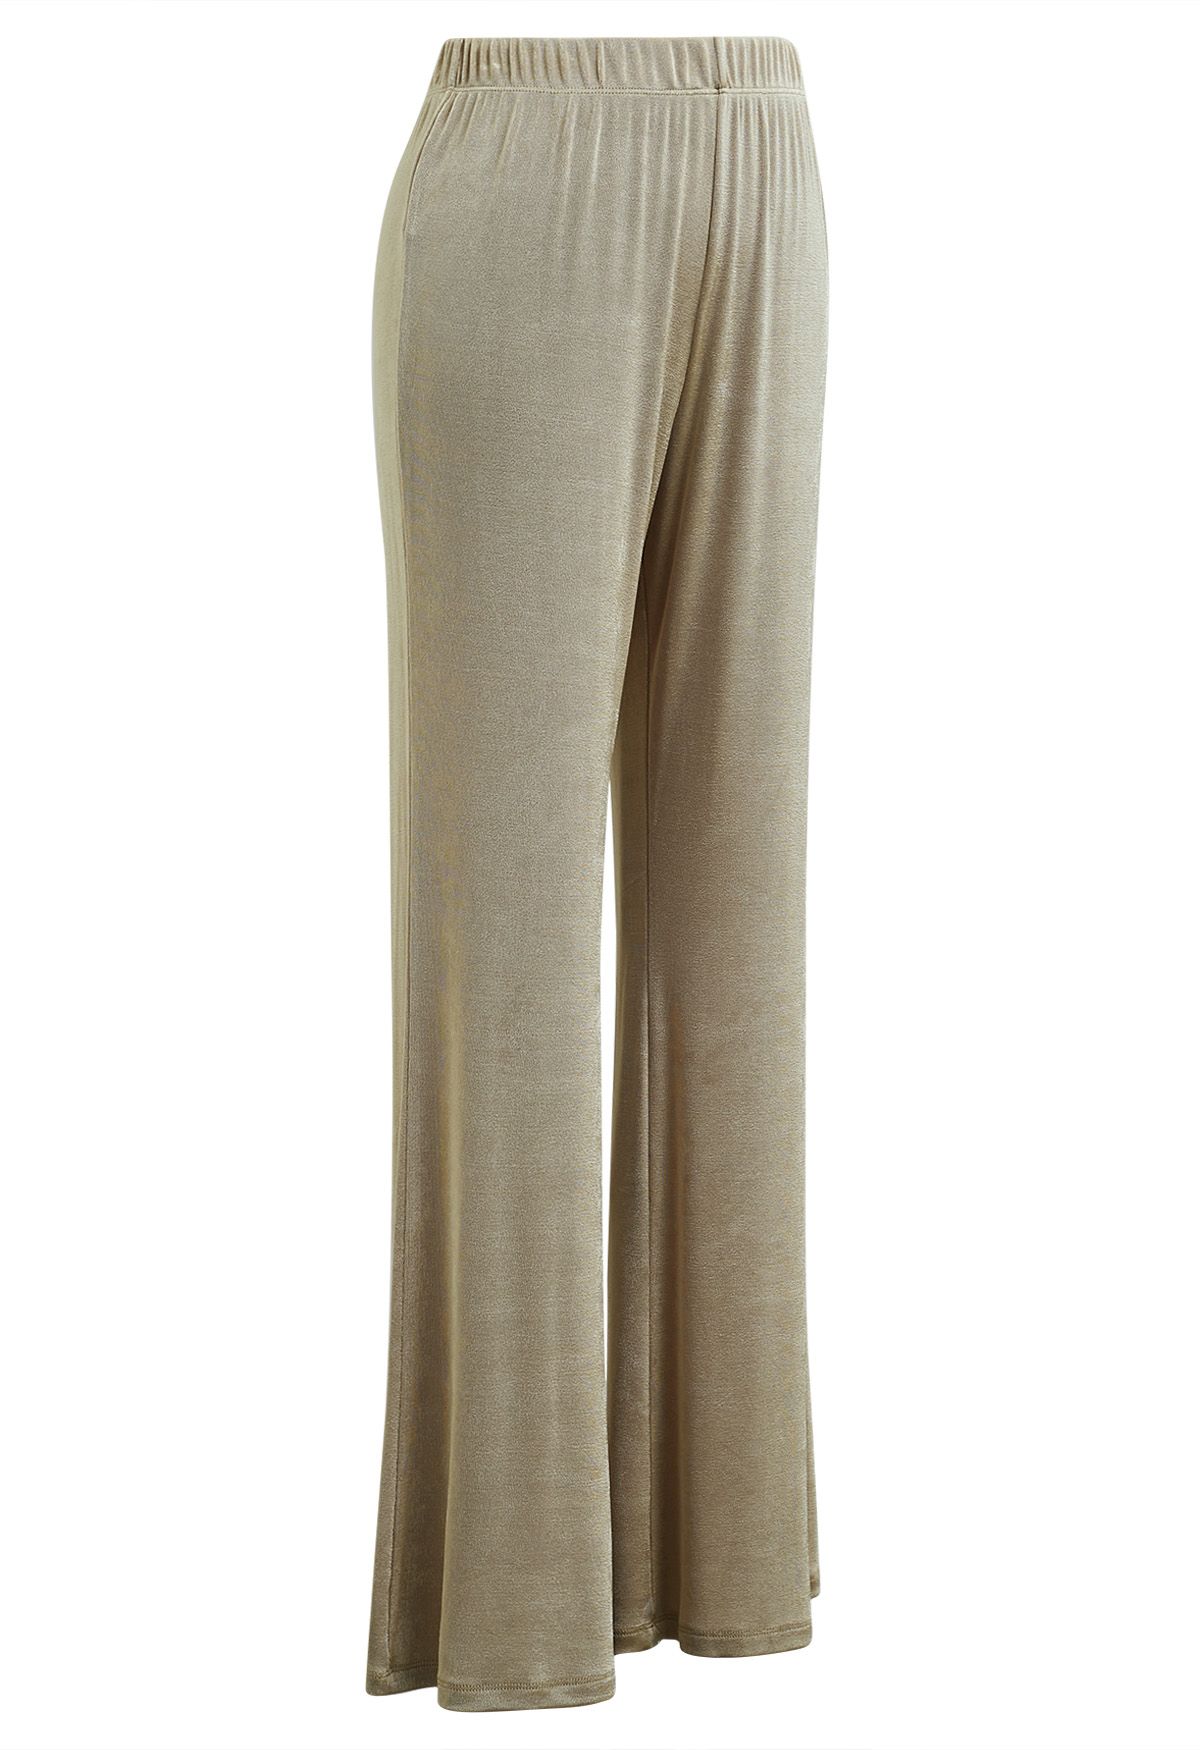 Relaxed Fit Flare Hem Pants in Sand